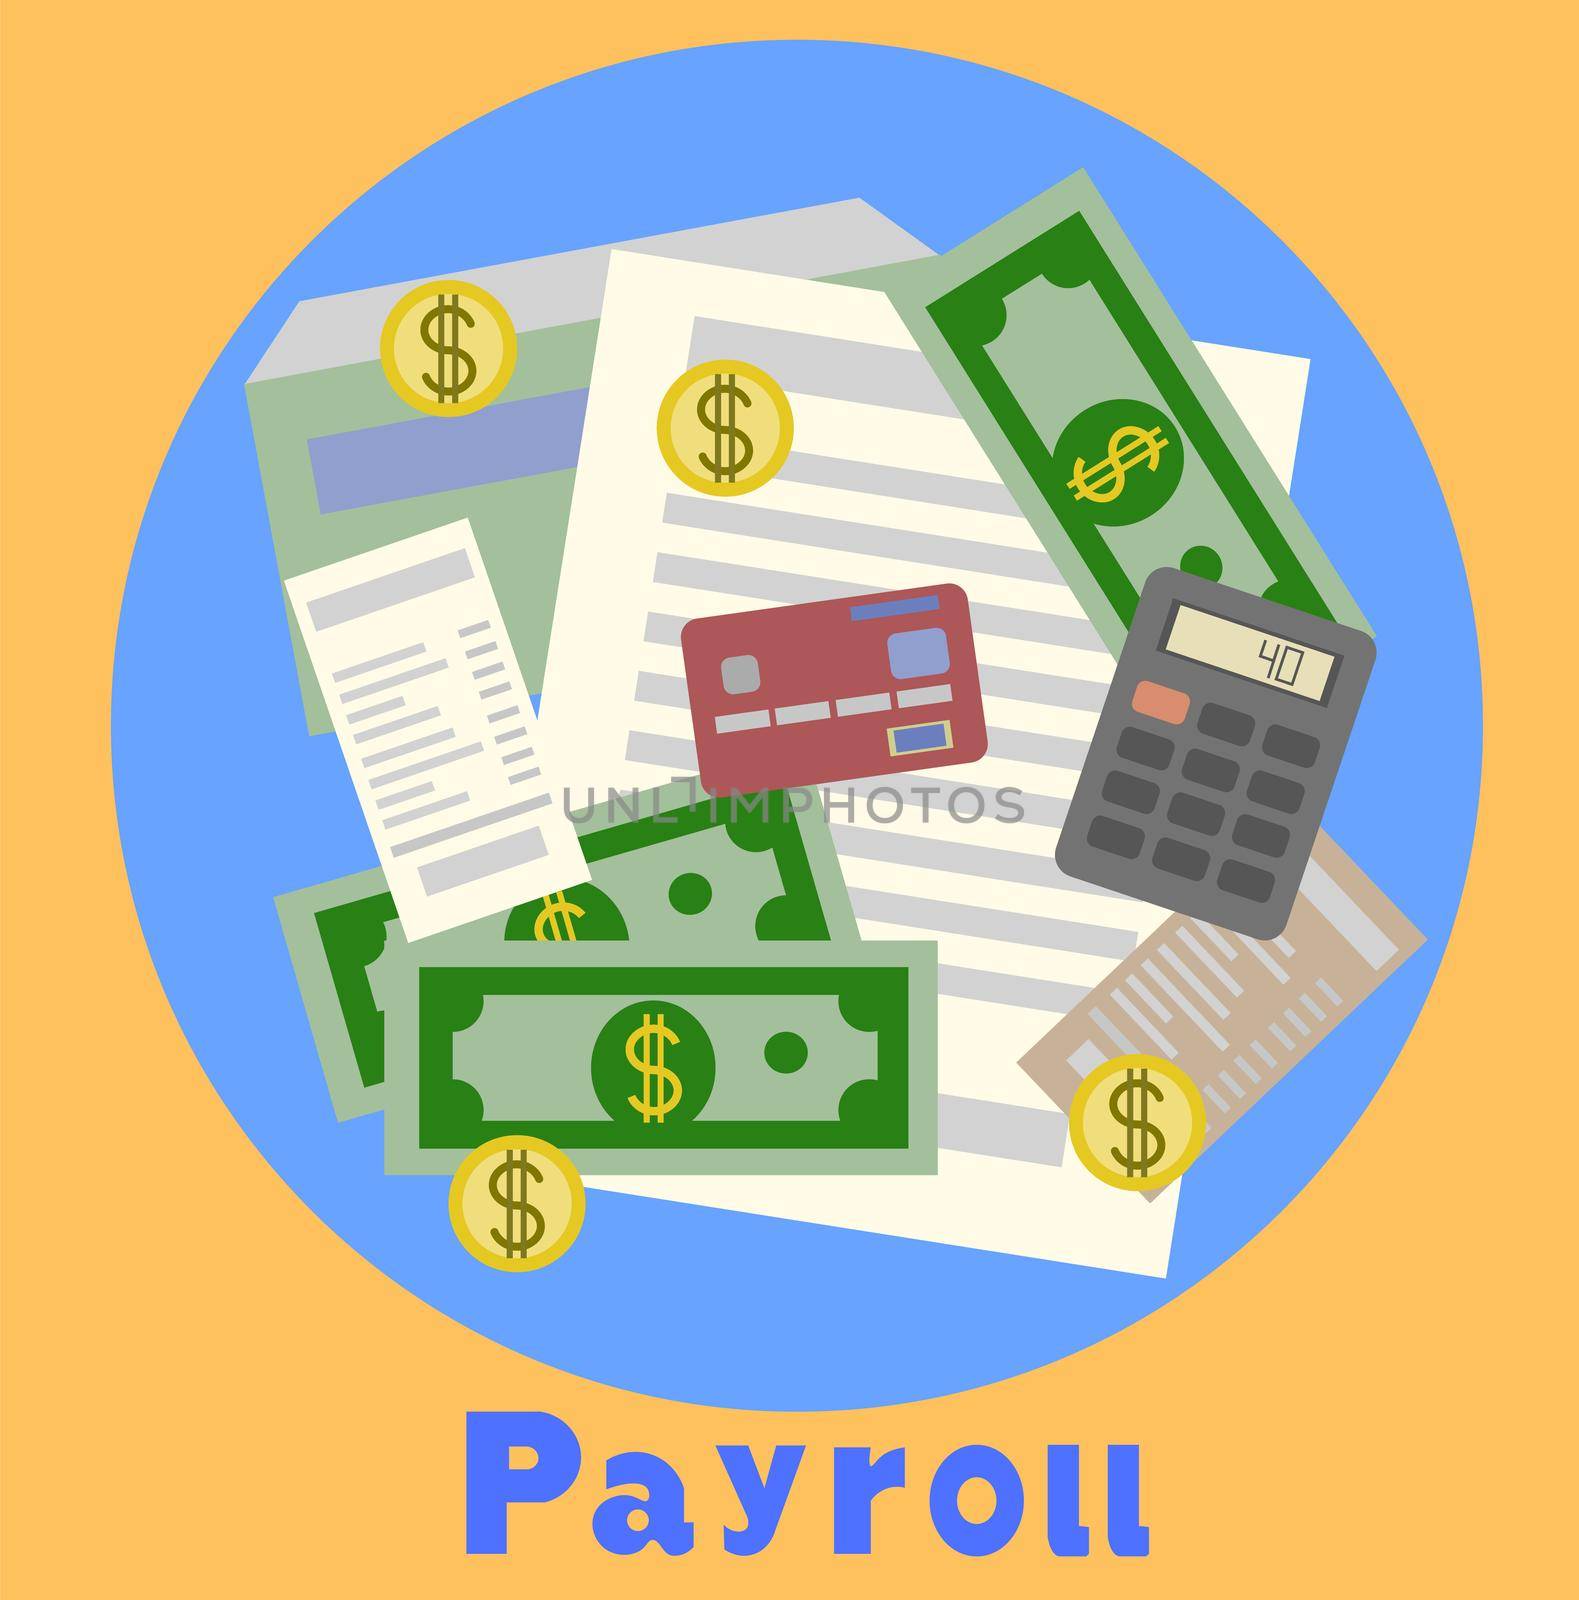 Payroll, invoice sheet flat illustration. Payroll template, calculate salary, budget concepts. Top view. Modern flat design for web banners, web sites, infographics. Creative illustration